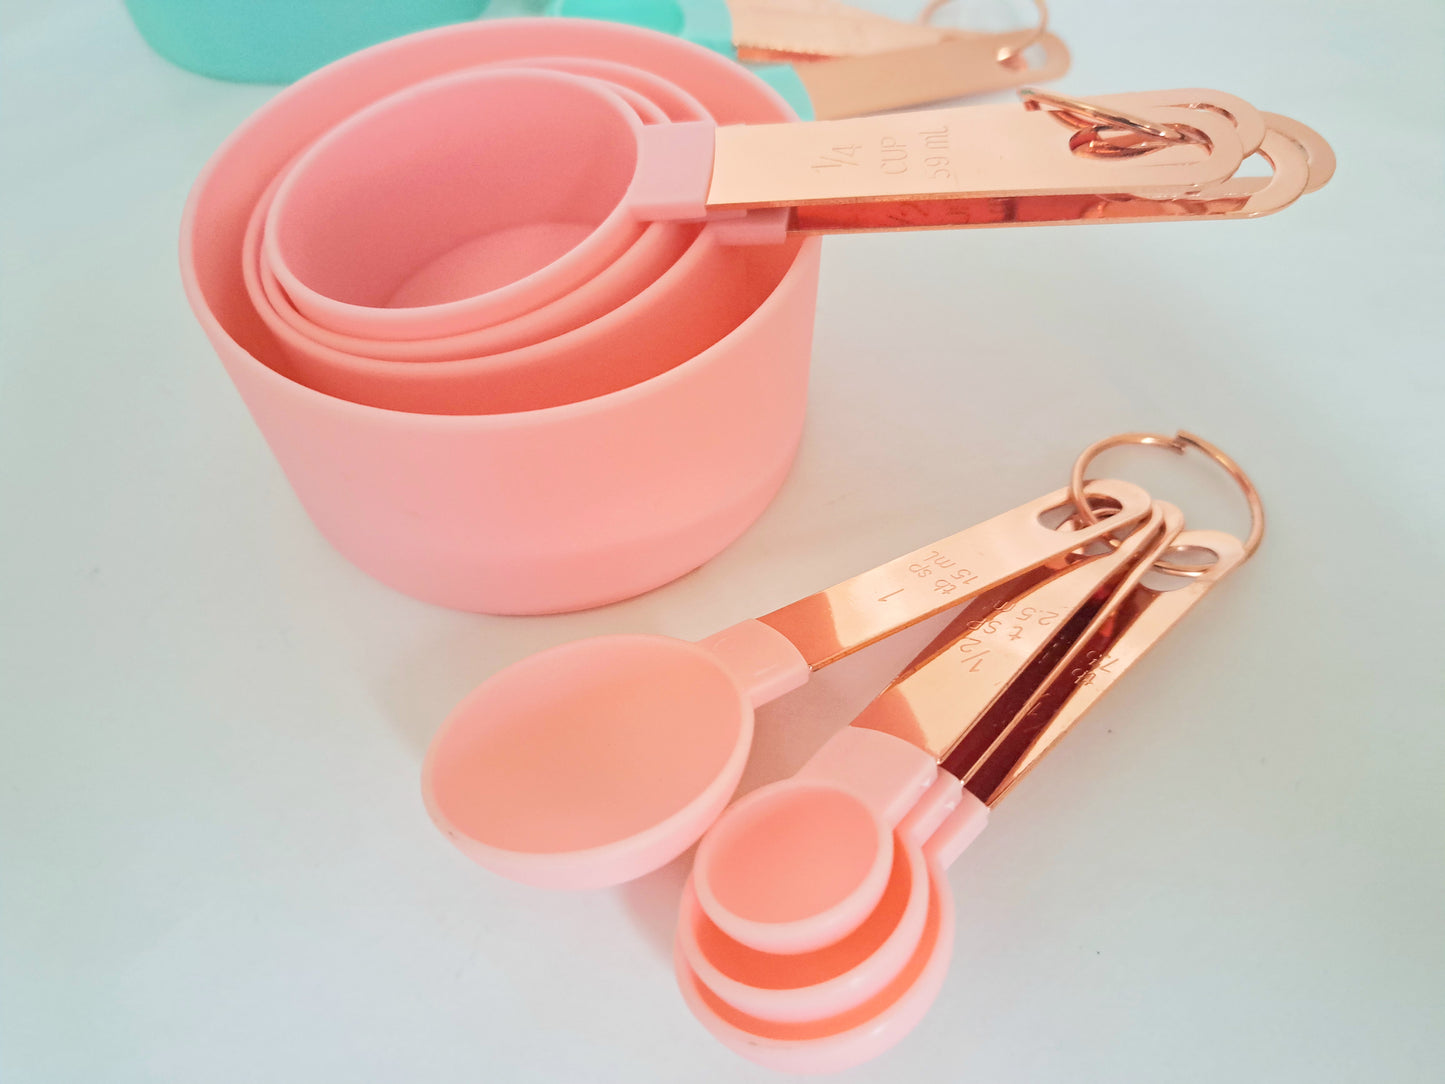 8 Peice Measuring Set - Spoons & Cups